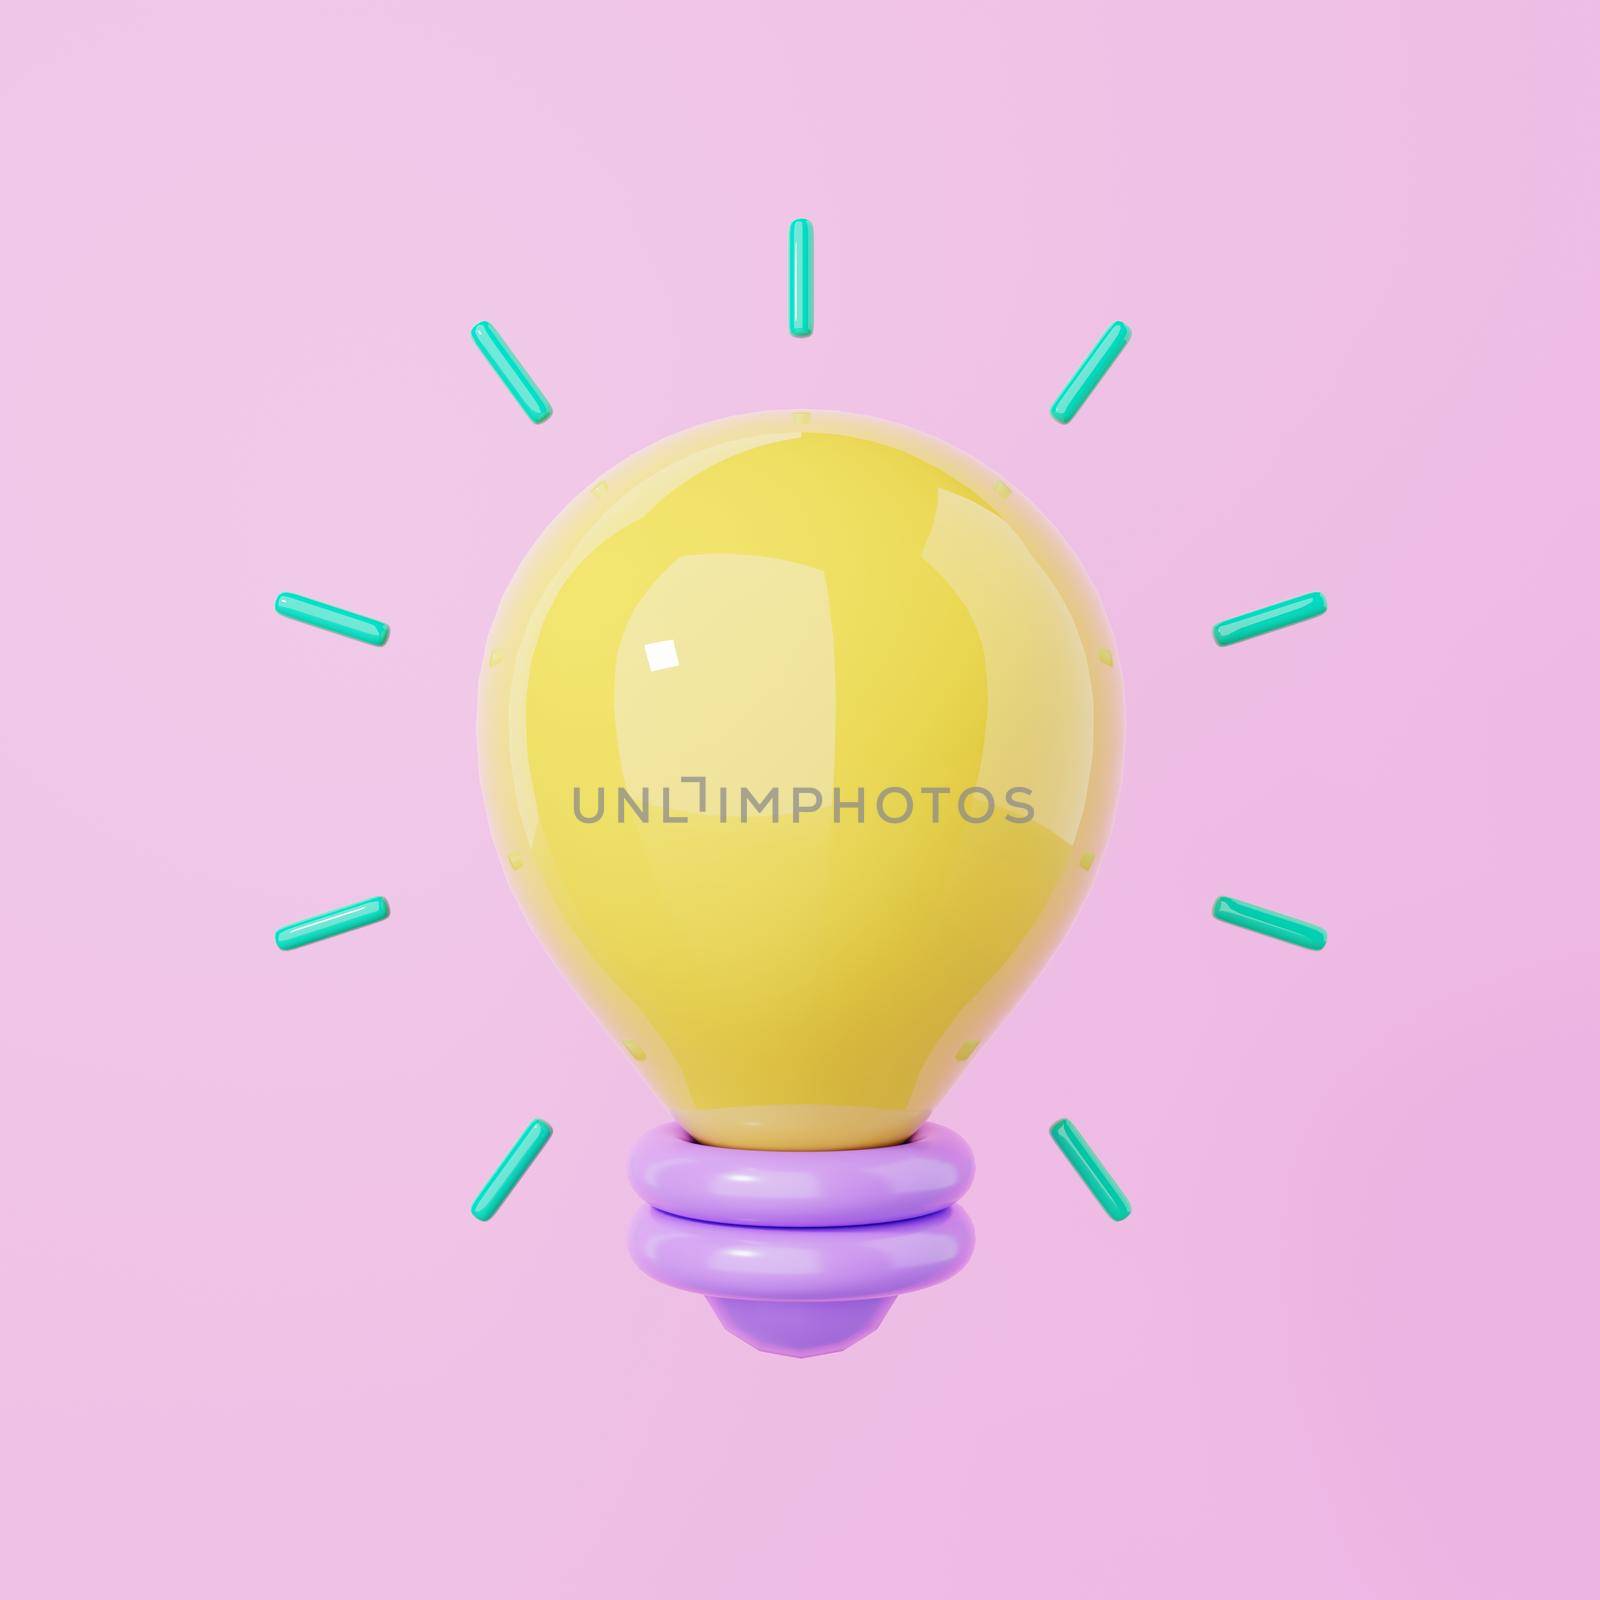 Minimalism light bulb with a blink on pink background. Object and creative idea symbol concept. 3D illustration rendering by MiniStocker